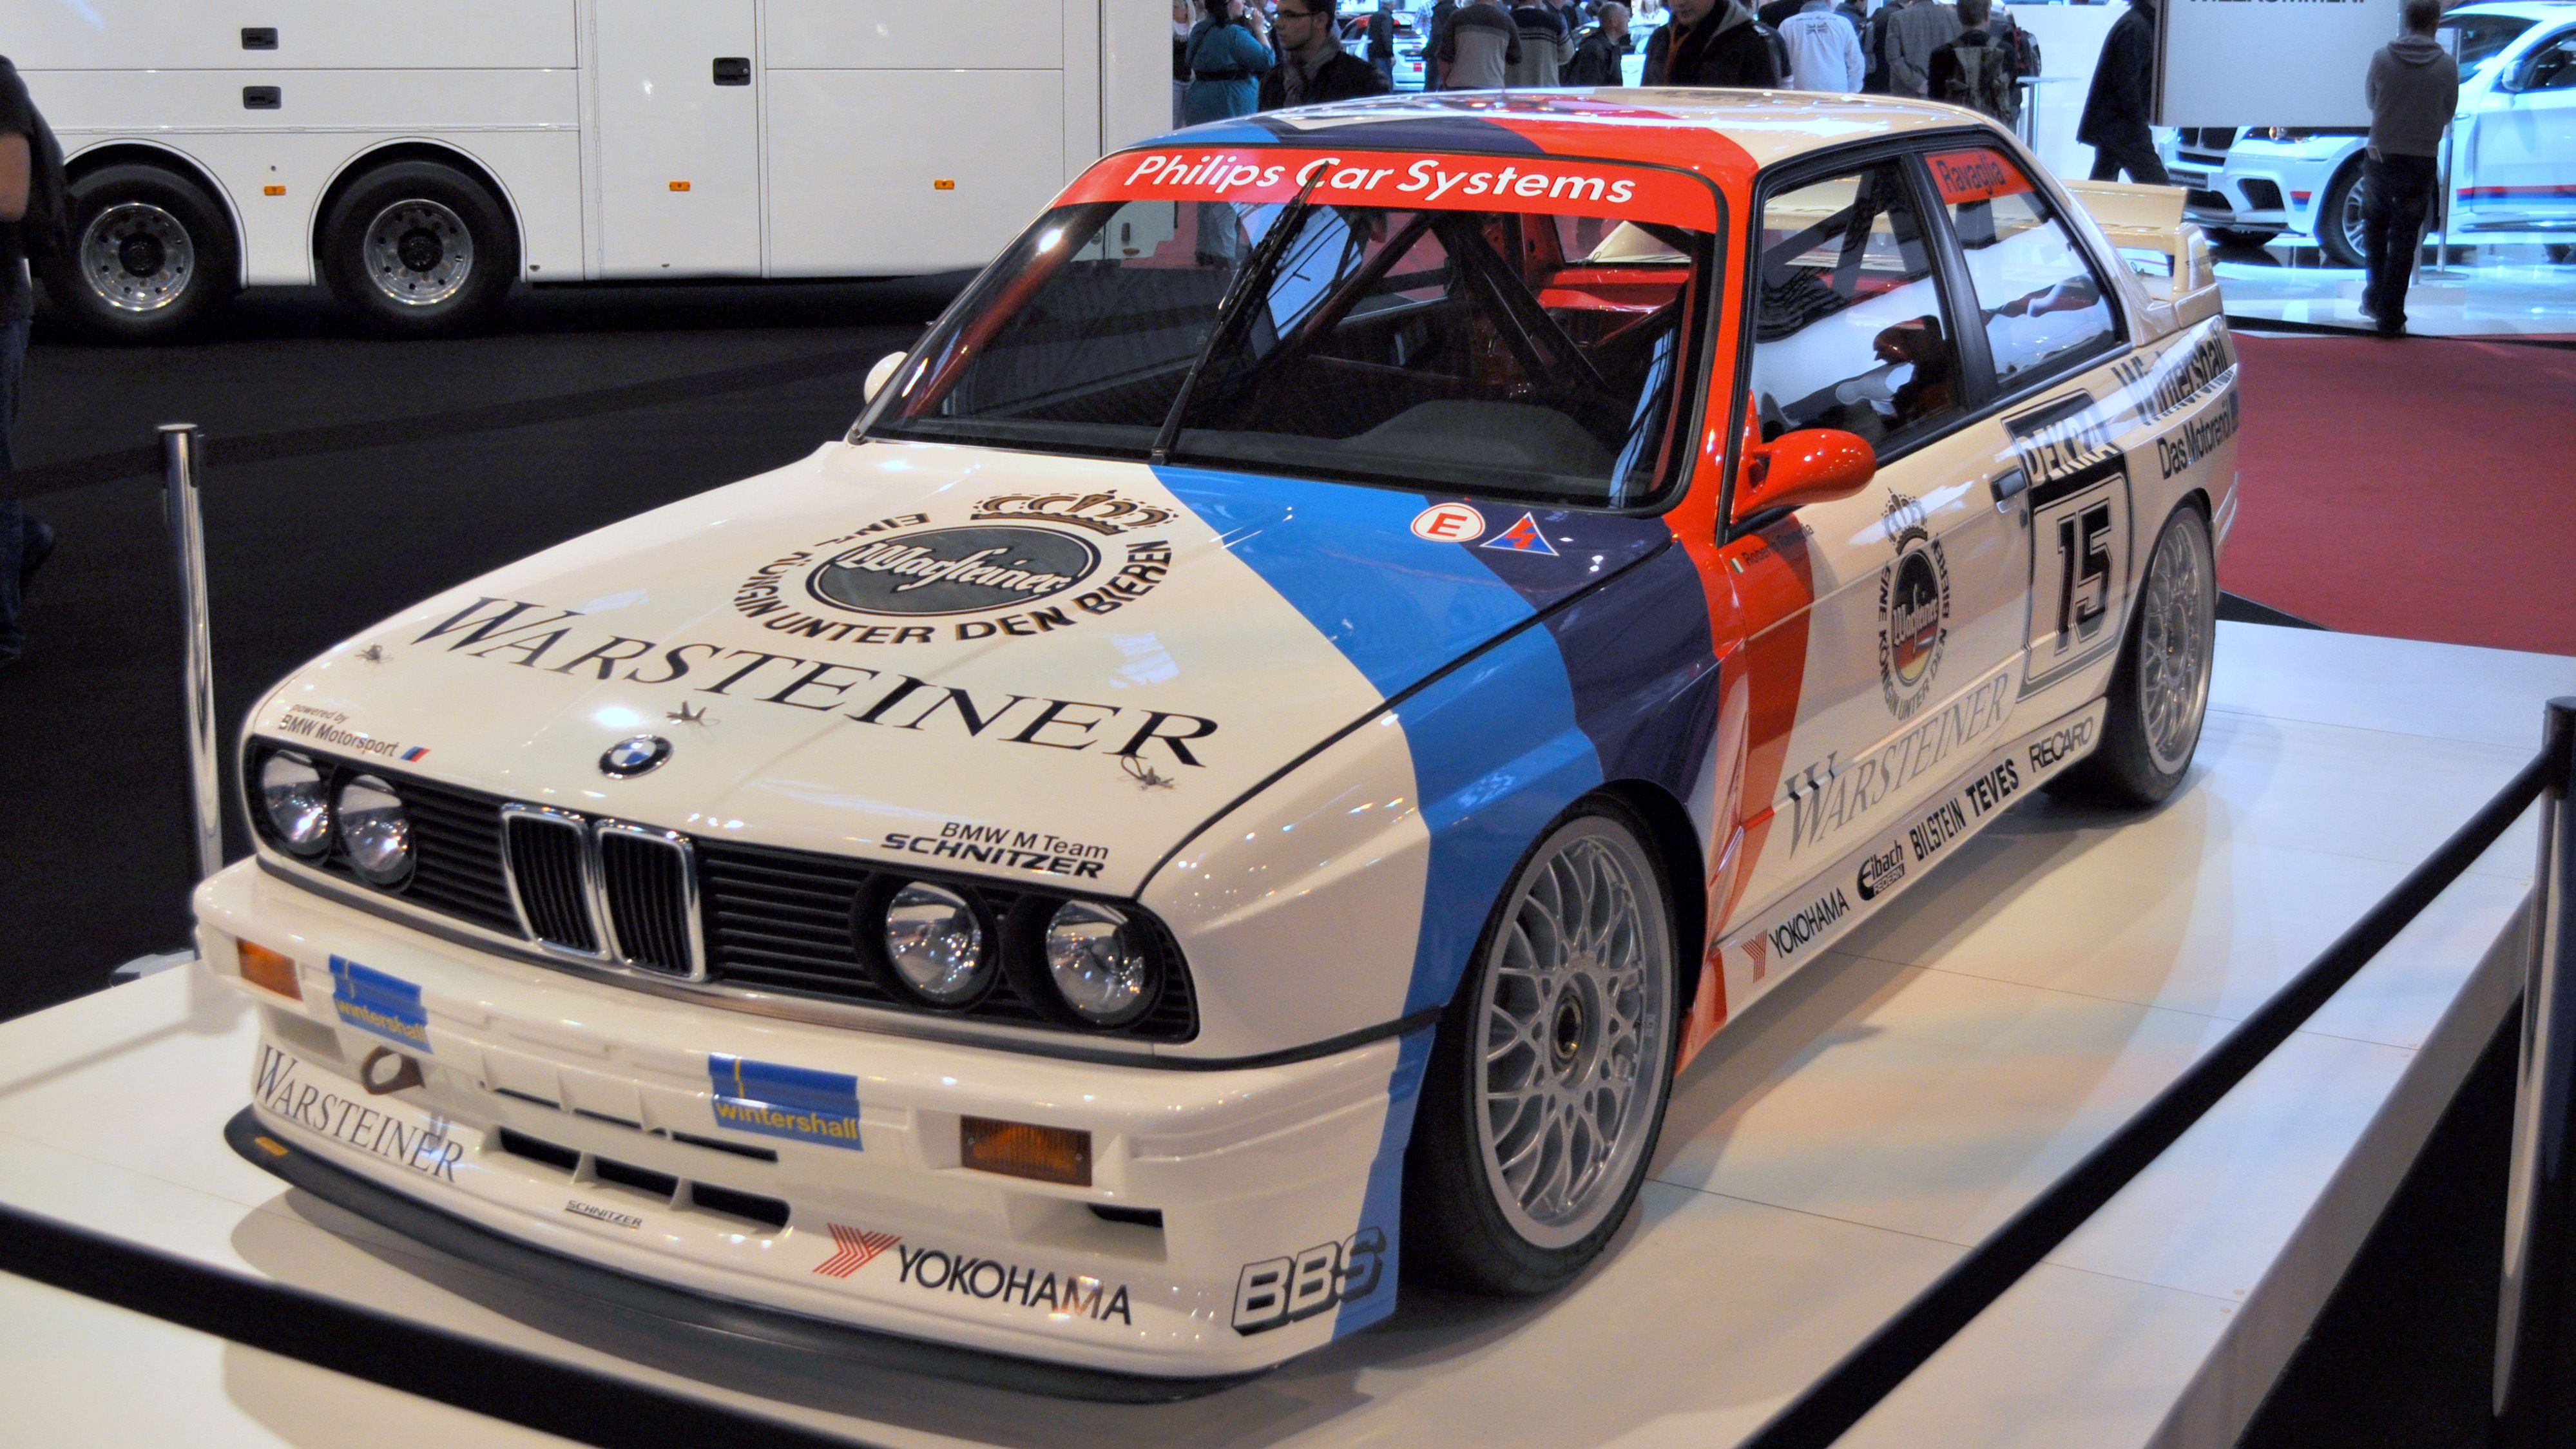 BMW-E30-M3 at a motor show